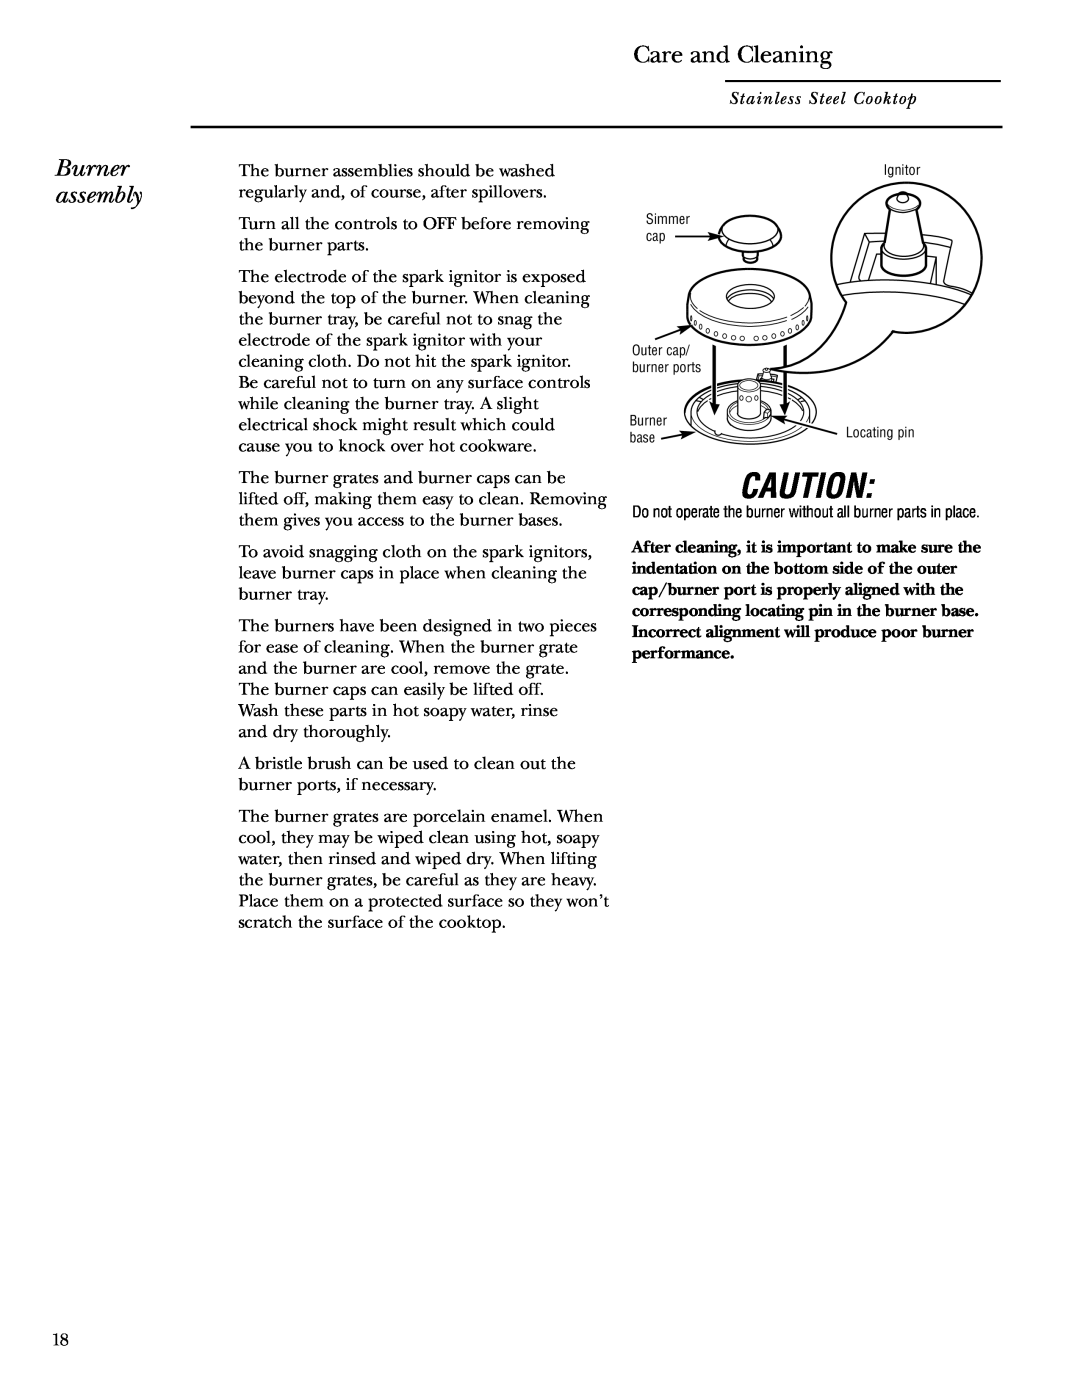 GE 36 owner manual Burner assembly, Care and Cleaning 